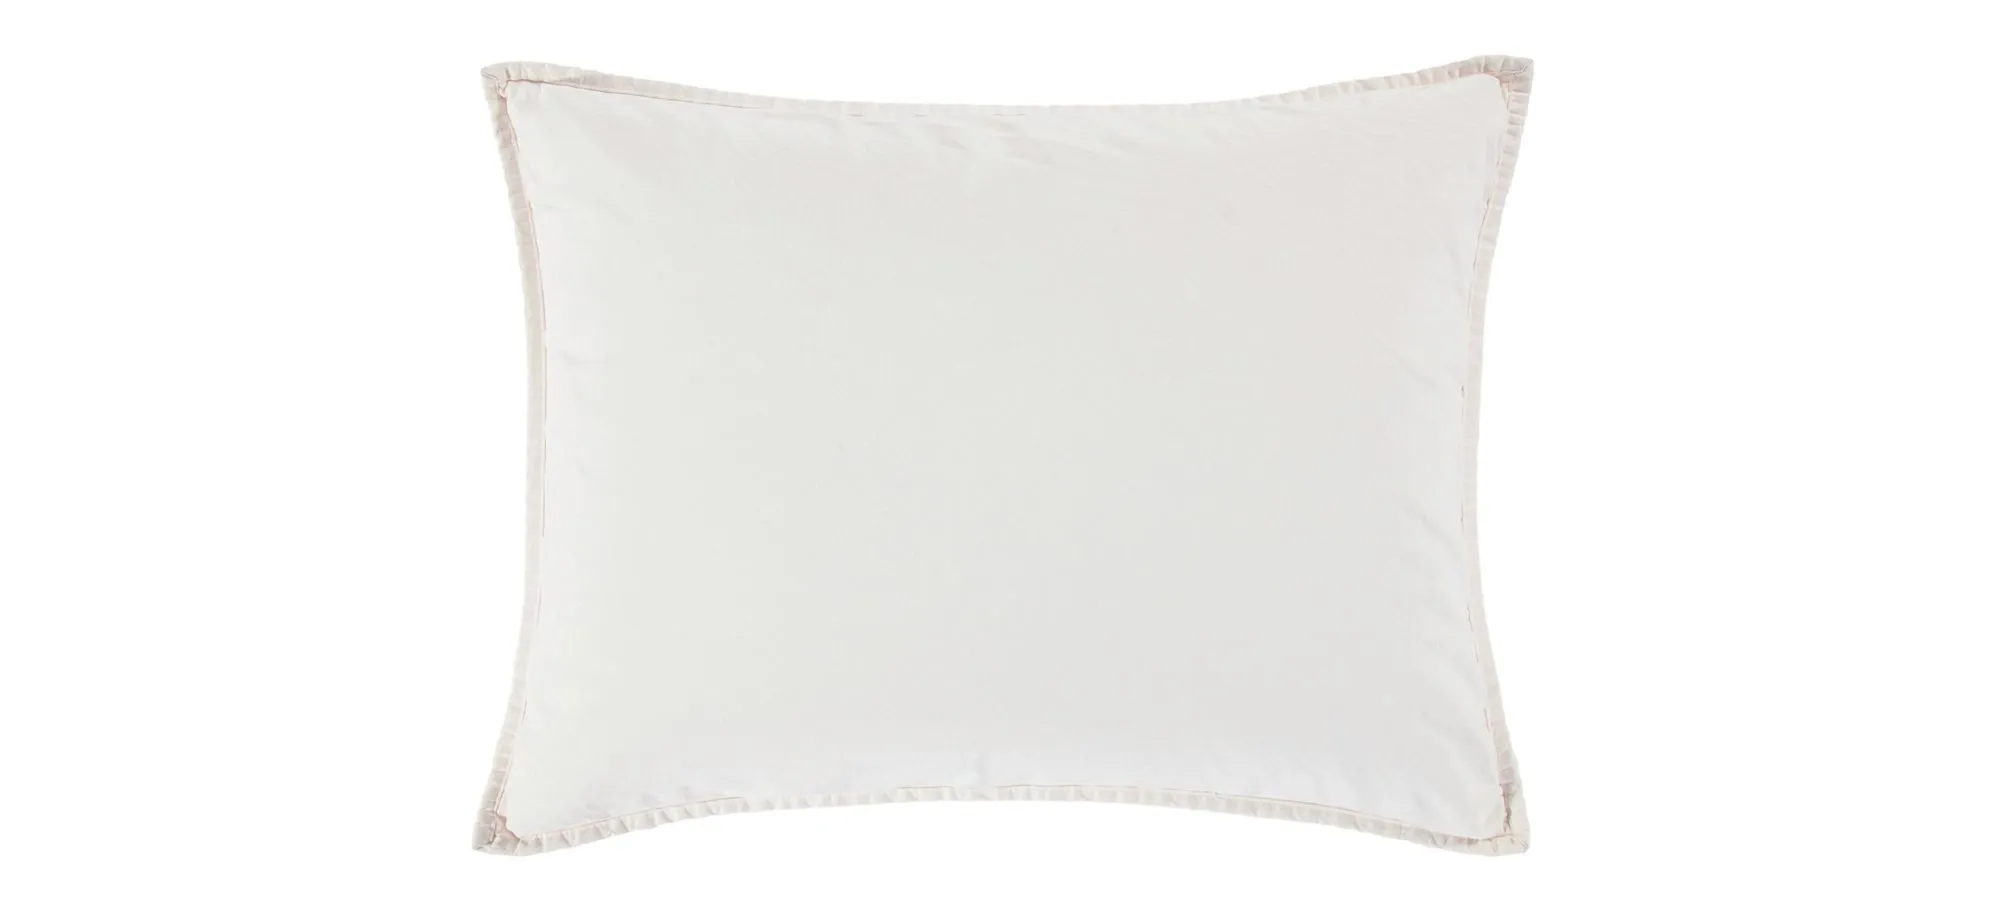 Twombly Pillow Sham in Natural by HiEnd Accents